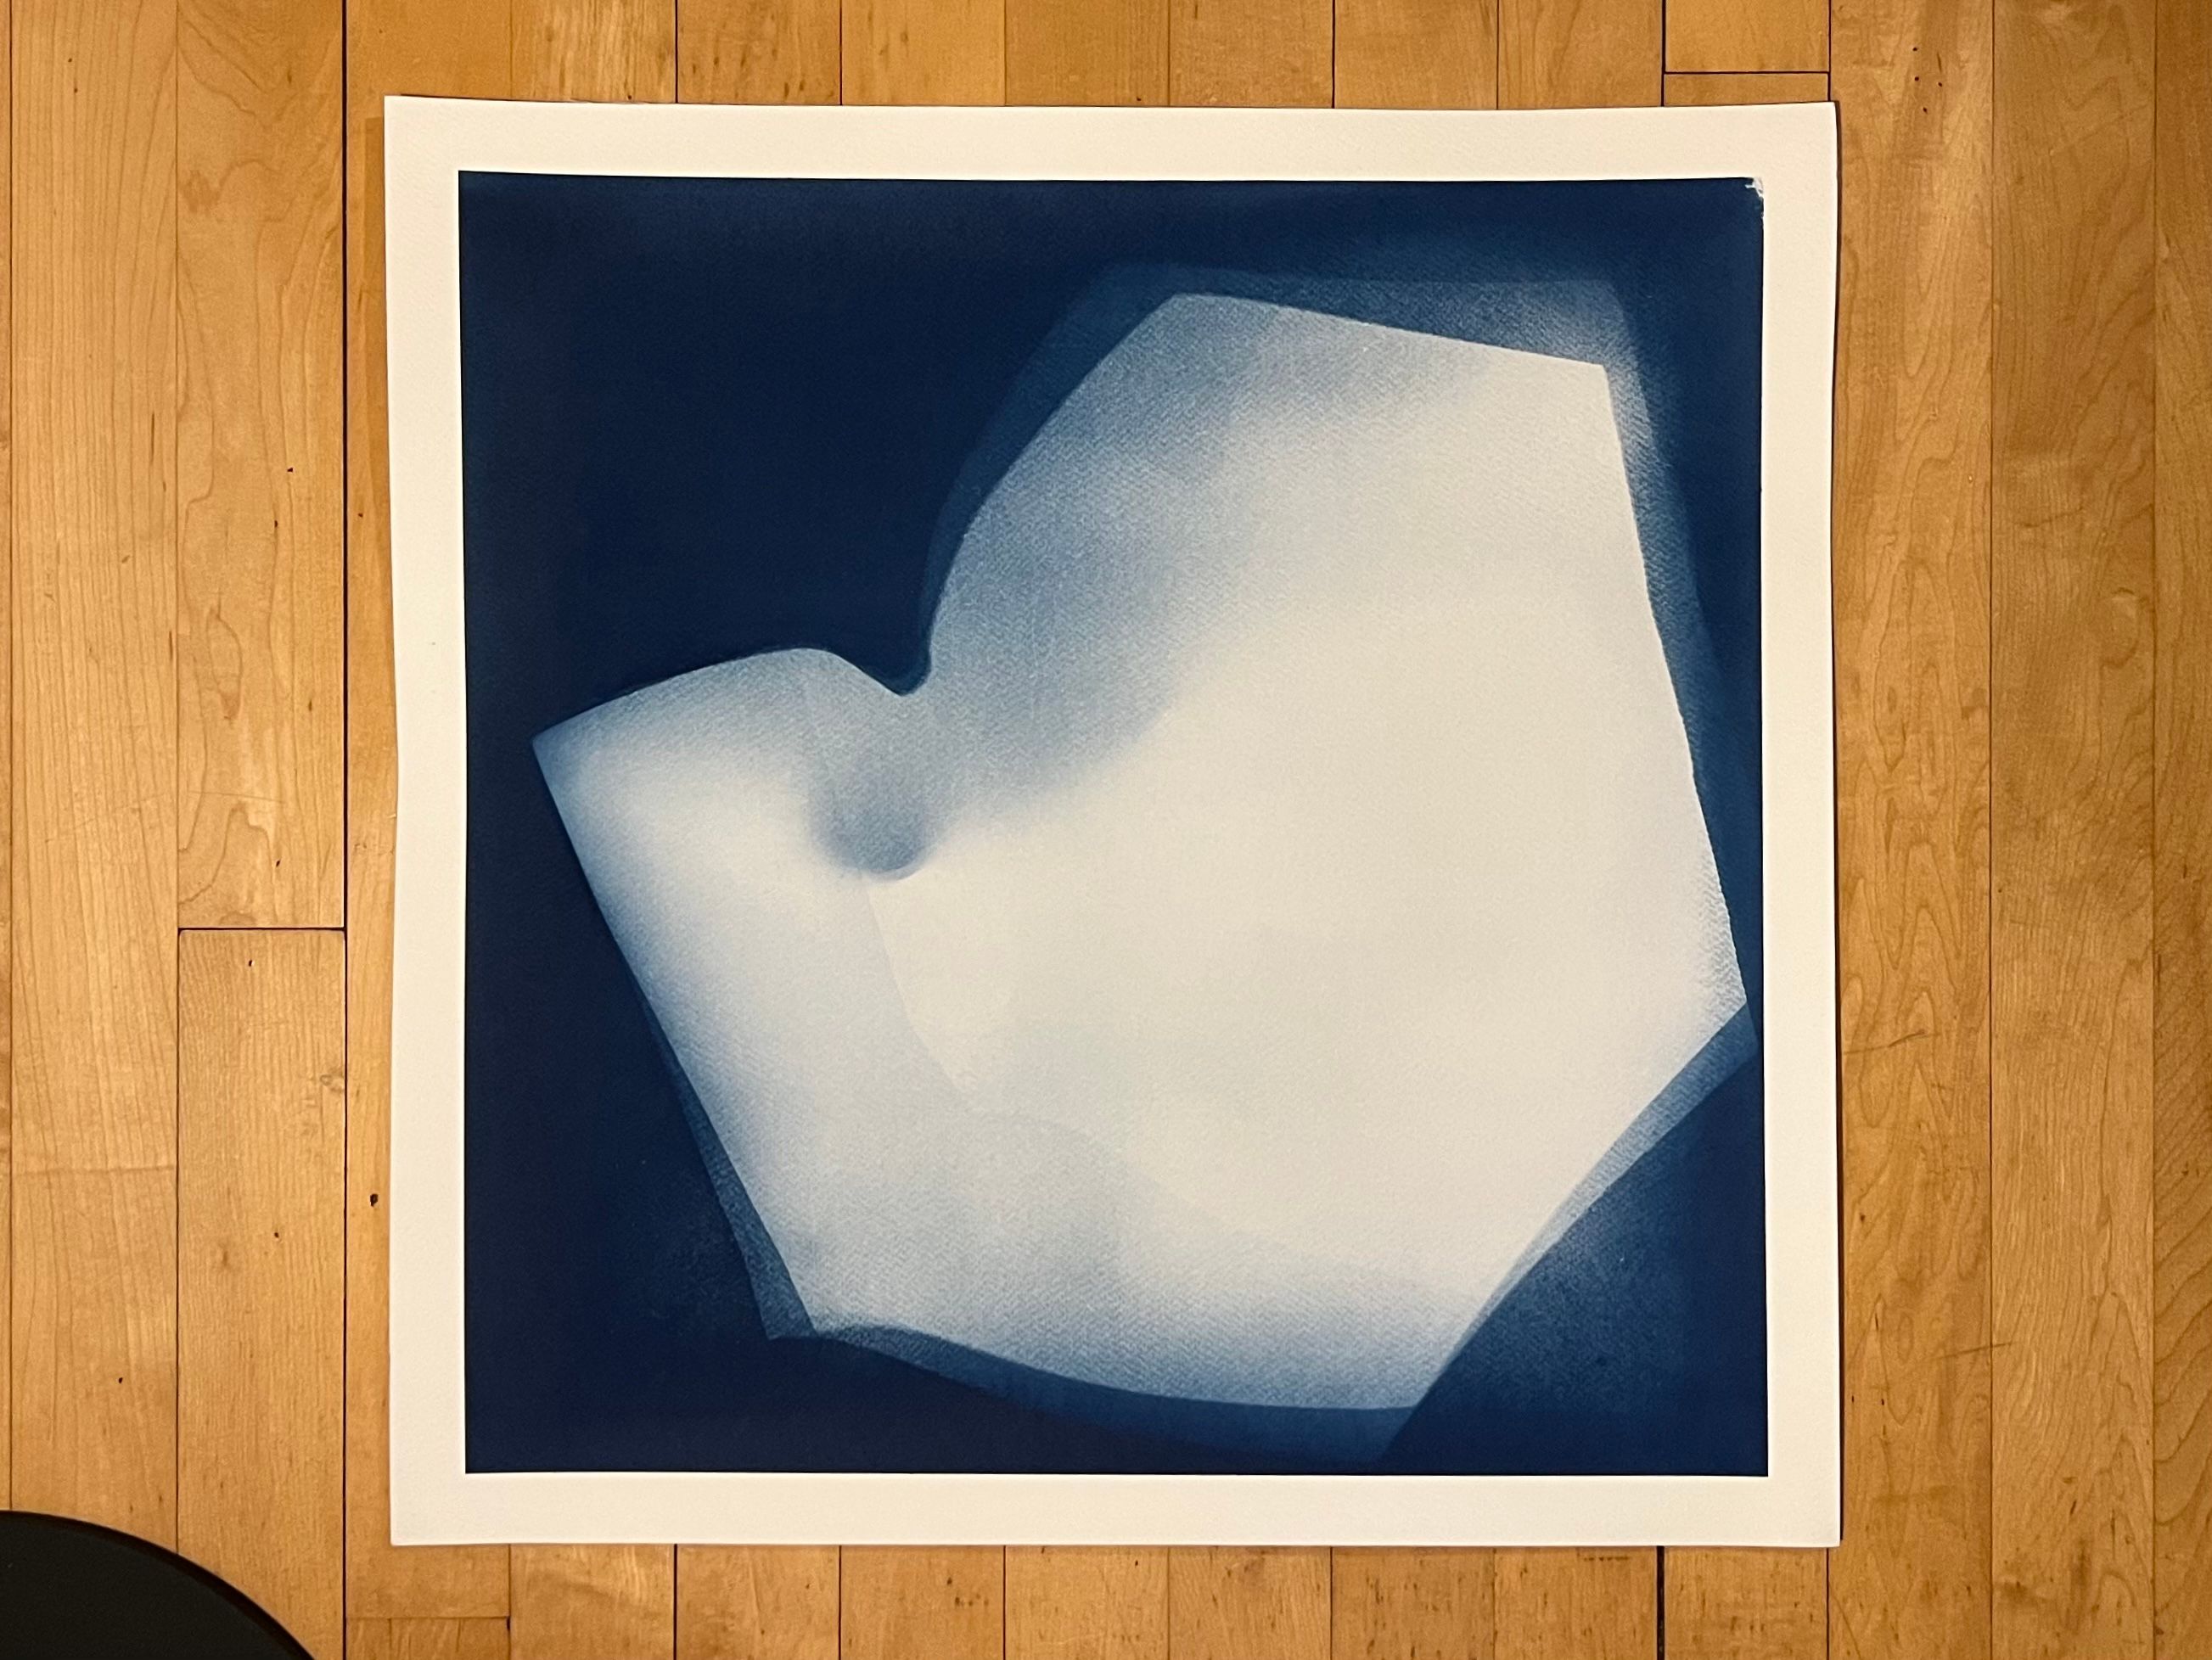 Cyanotype from a paper and resin form